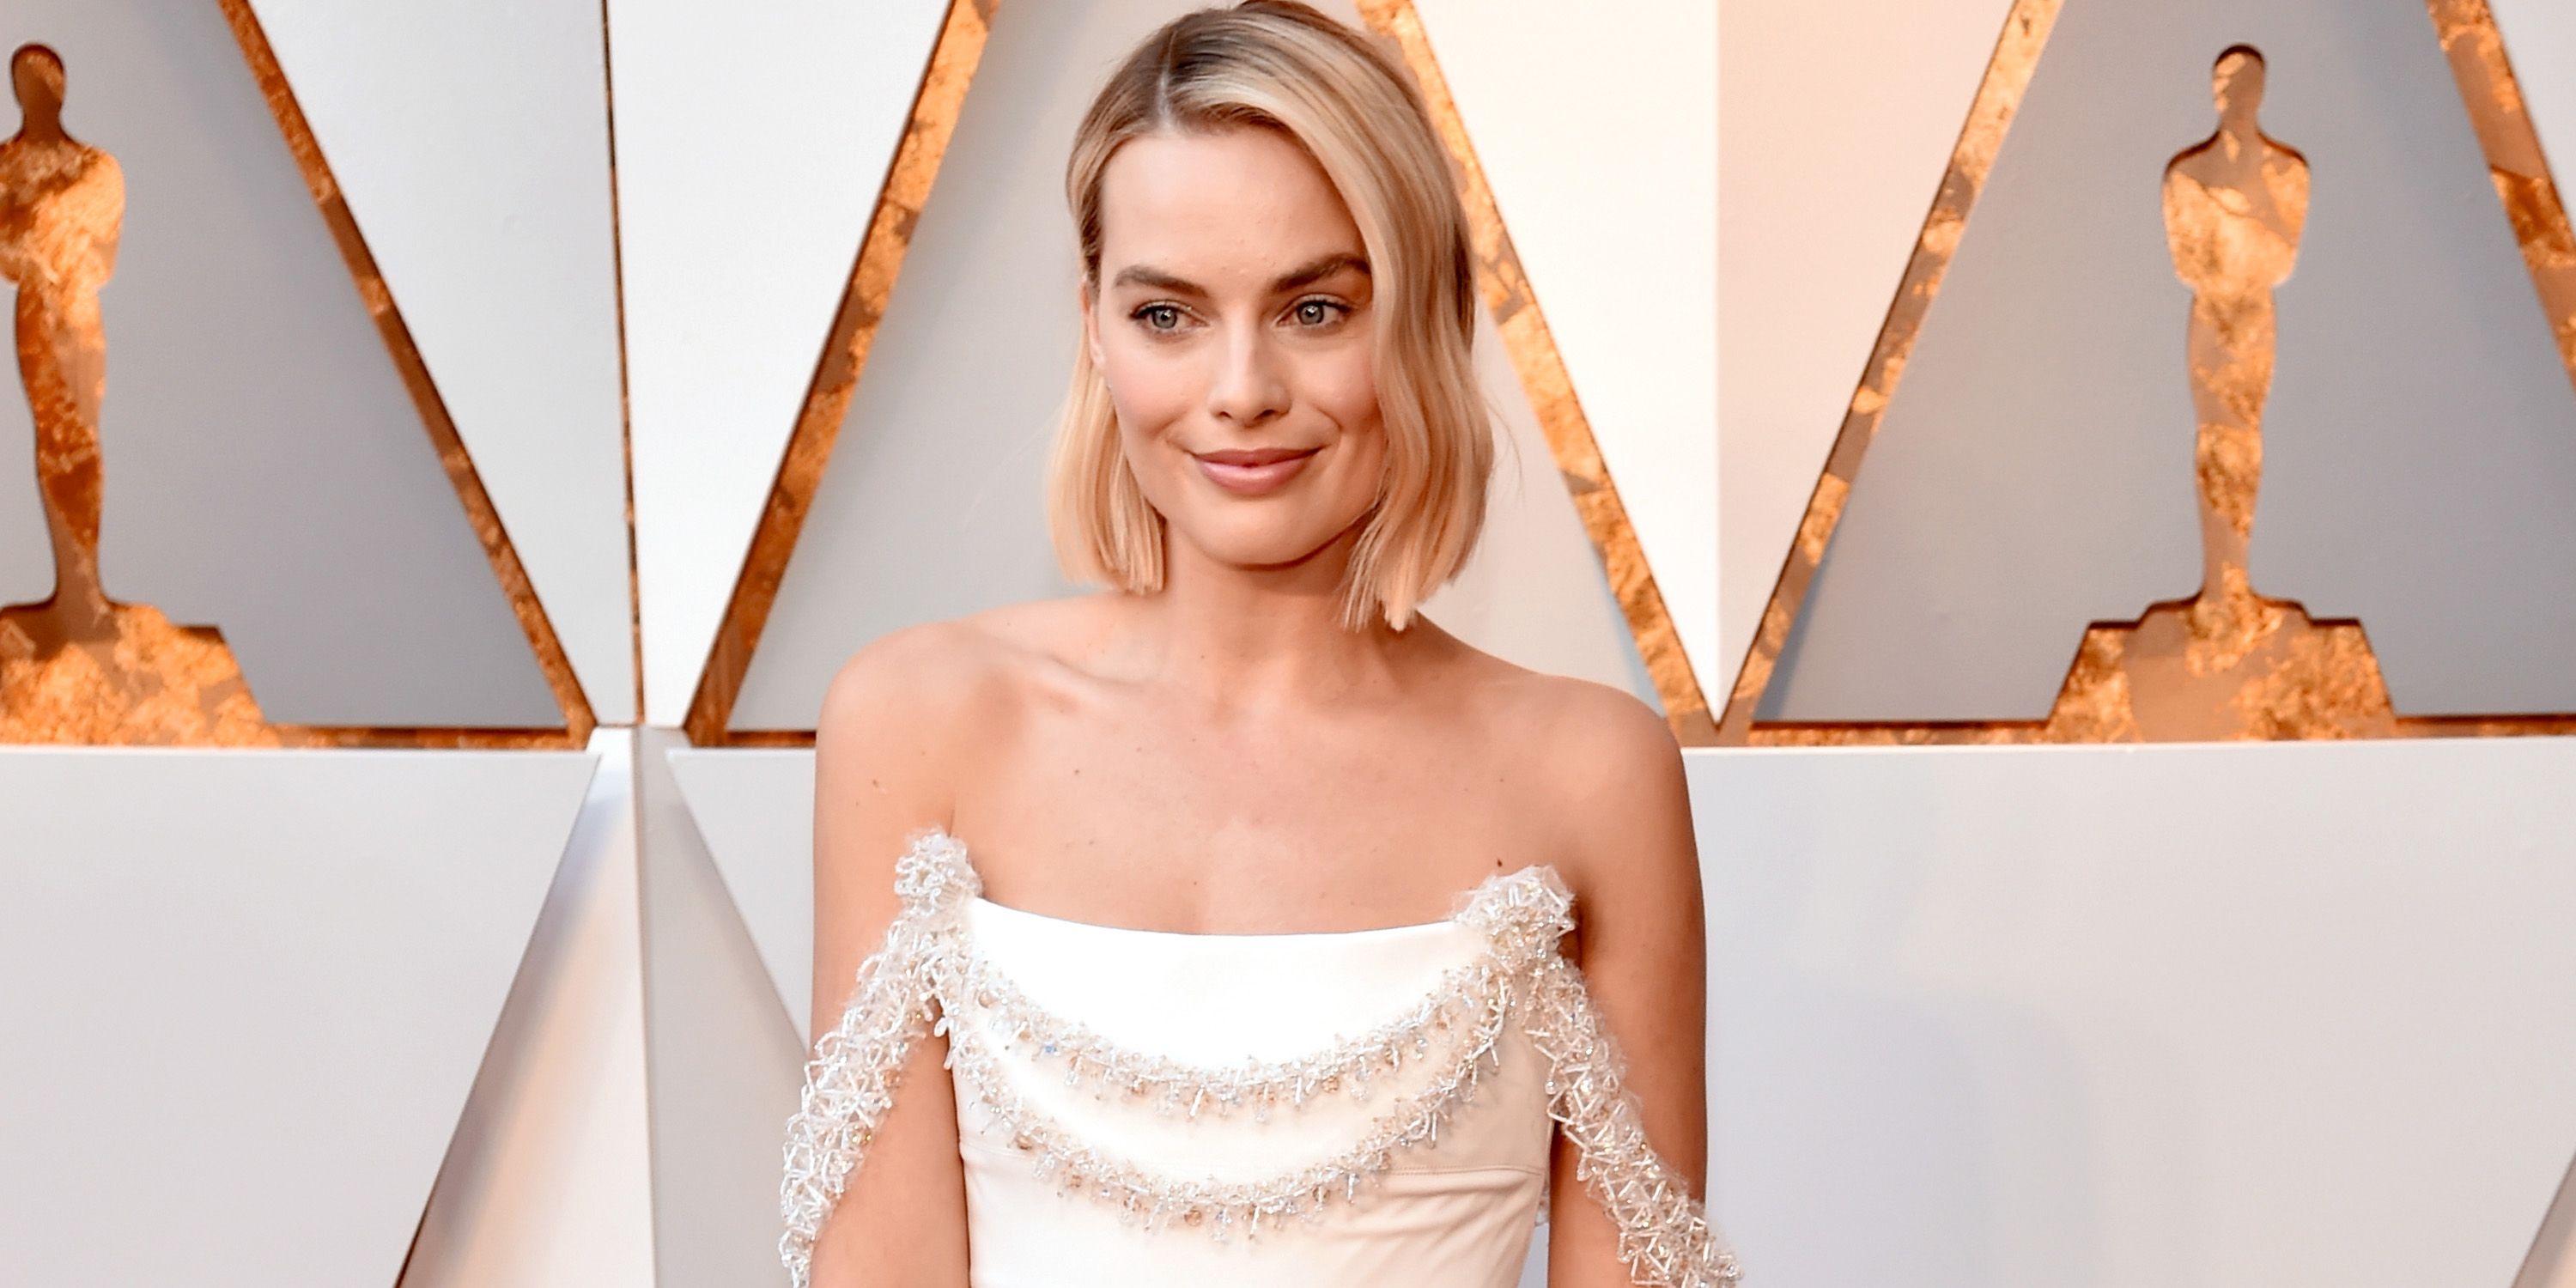 Margot Robbie Had a Wardrobe Malfunction At The 2018 Oscars - Margot Robbie  Sewed Her Own Dress After a Wardrobe Mishap at The Oscars